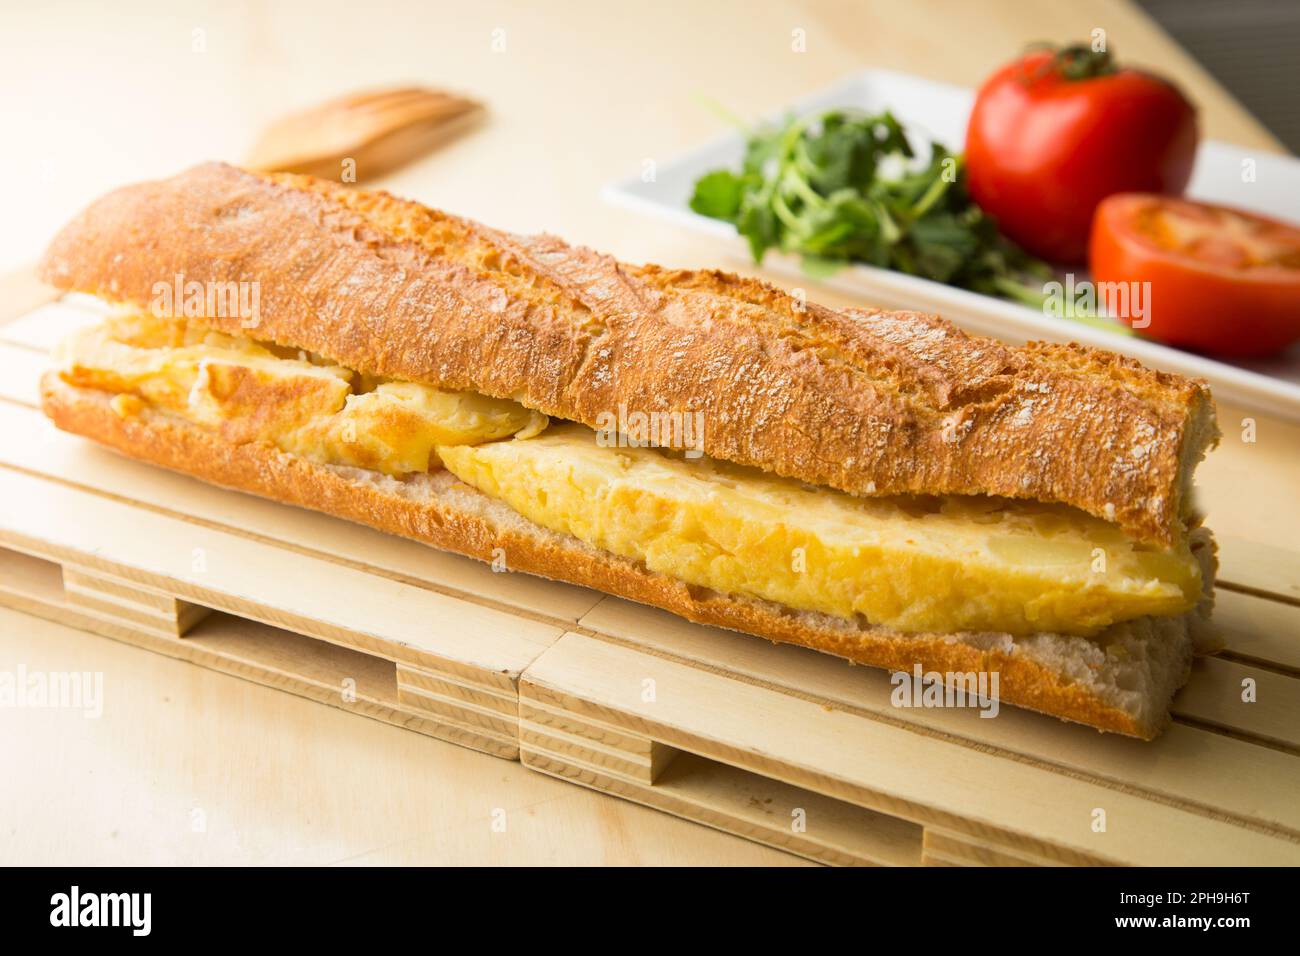 Delicious sandwich with spanish omelette with egg and potatoes. Stock Photo